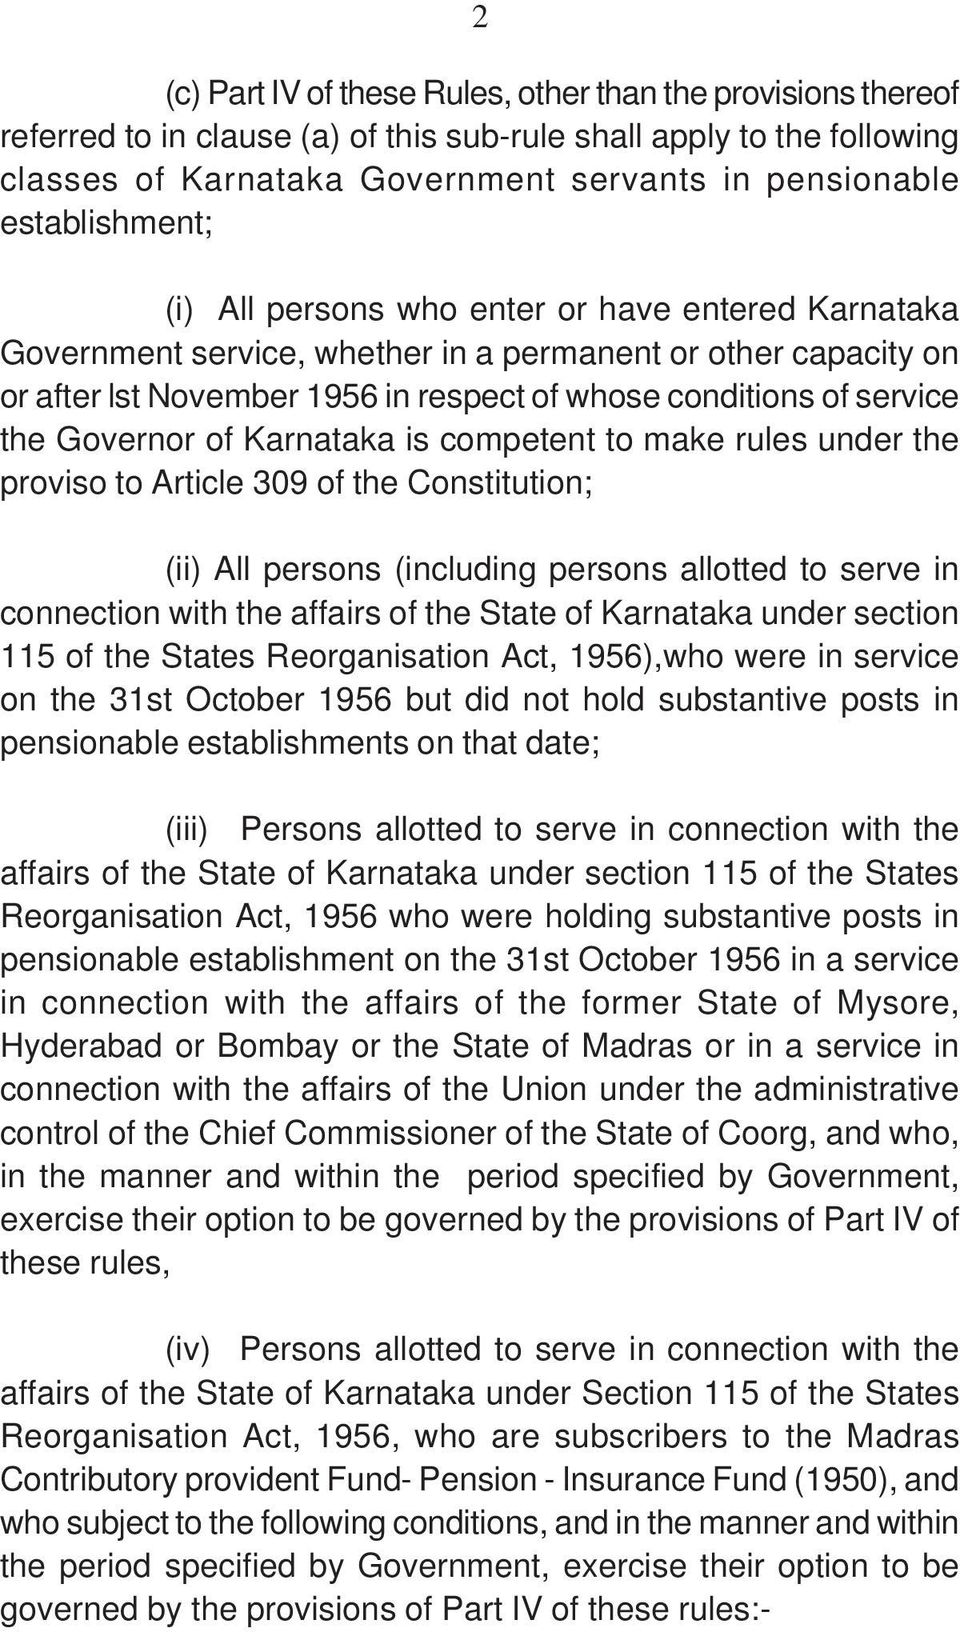 the Governor of Karnataka is competent to make rules under the proviso to Article 309 of the Constitution; (ii) All persons (including persons allotted to serve in connection with the affairs of the